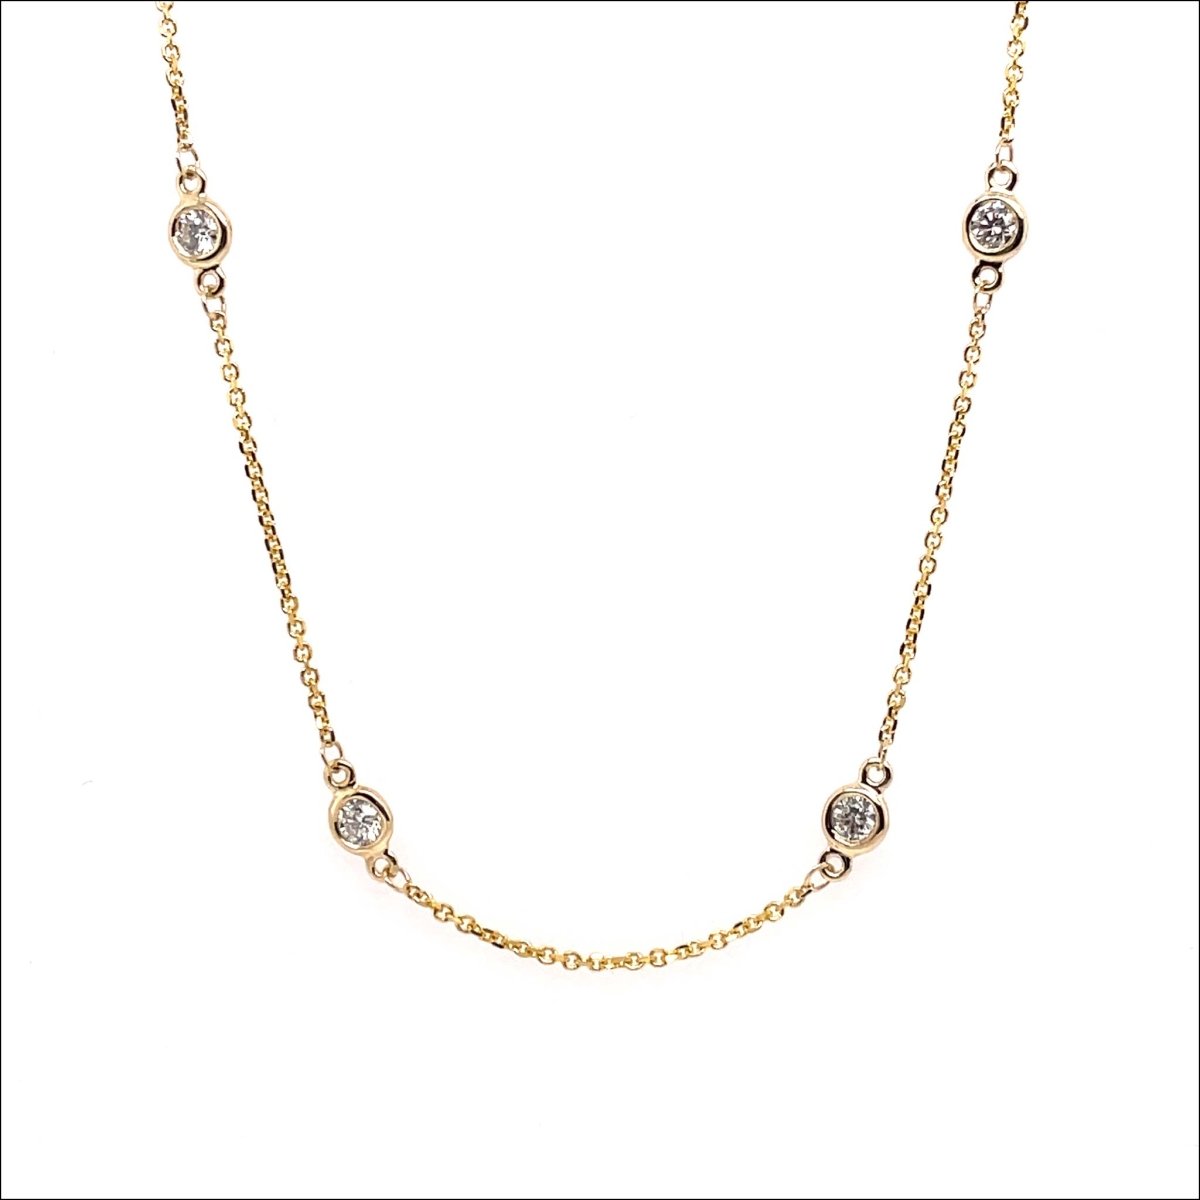 Diamond 1.34cttw Station Necklace 14KY 18" - JewelsmithNecklaces